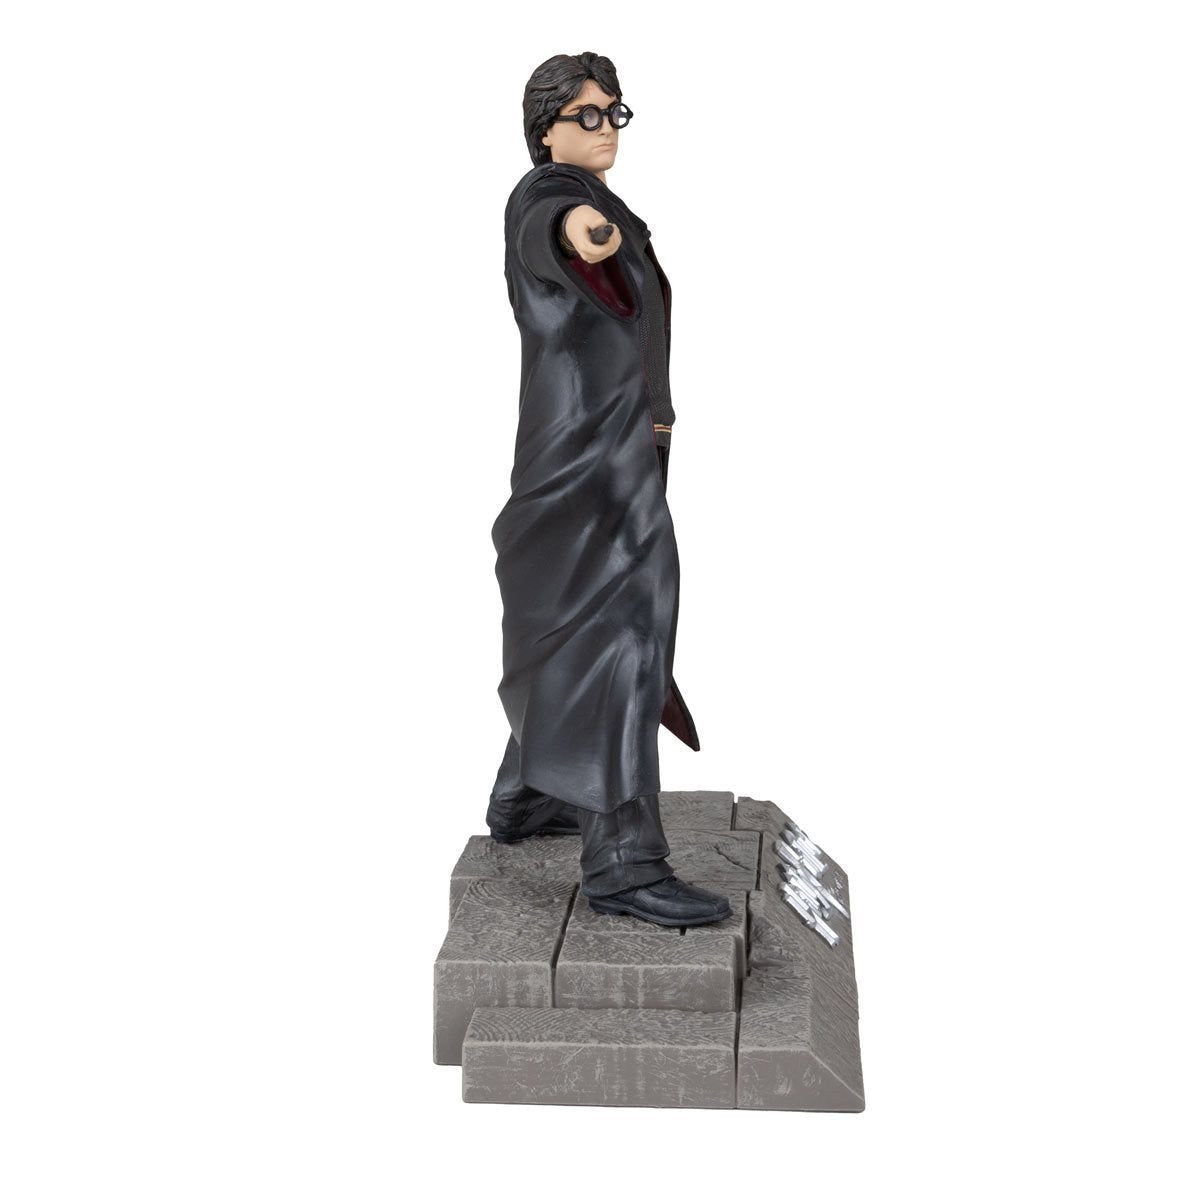 MCFARLANE Movie Maniacs WB 100: Harry Potter and the Goblet of Fire Limited Edition 6-Inch Scale Posed Figure